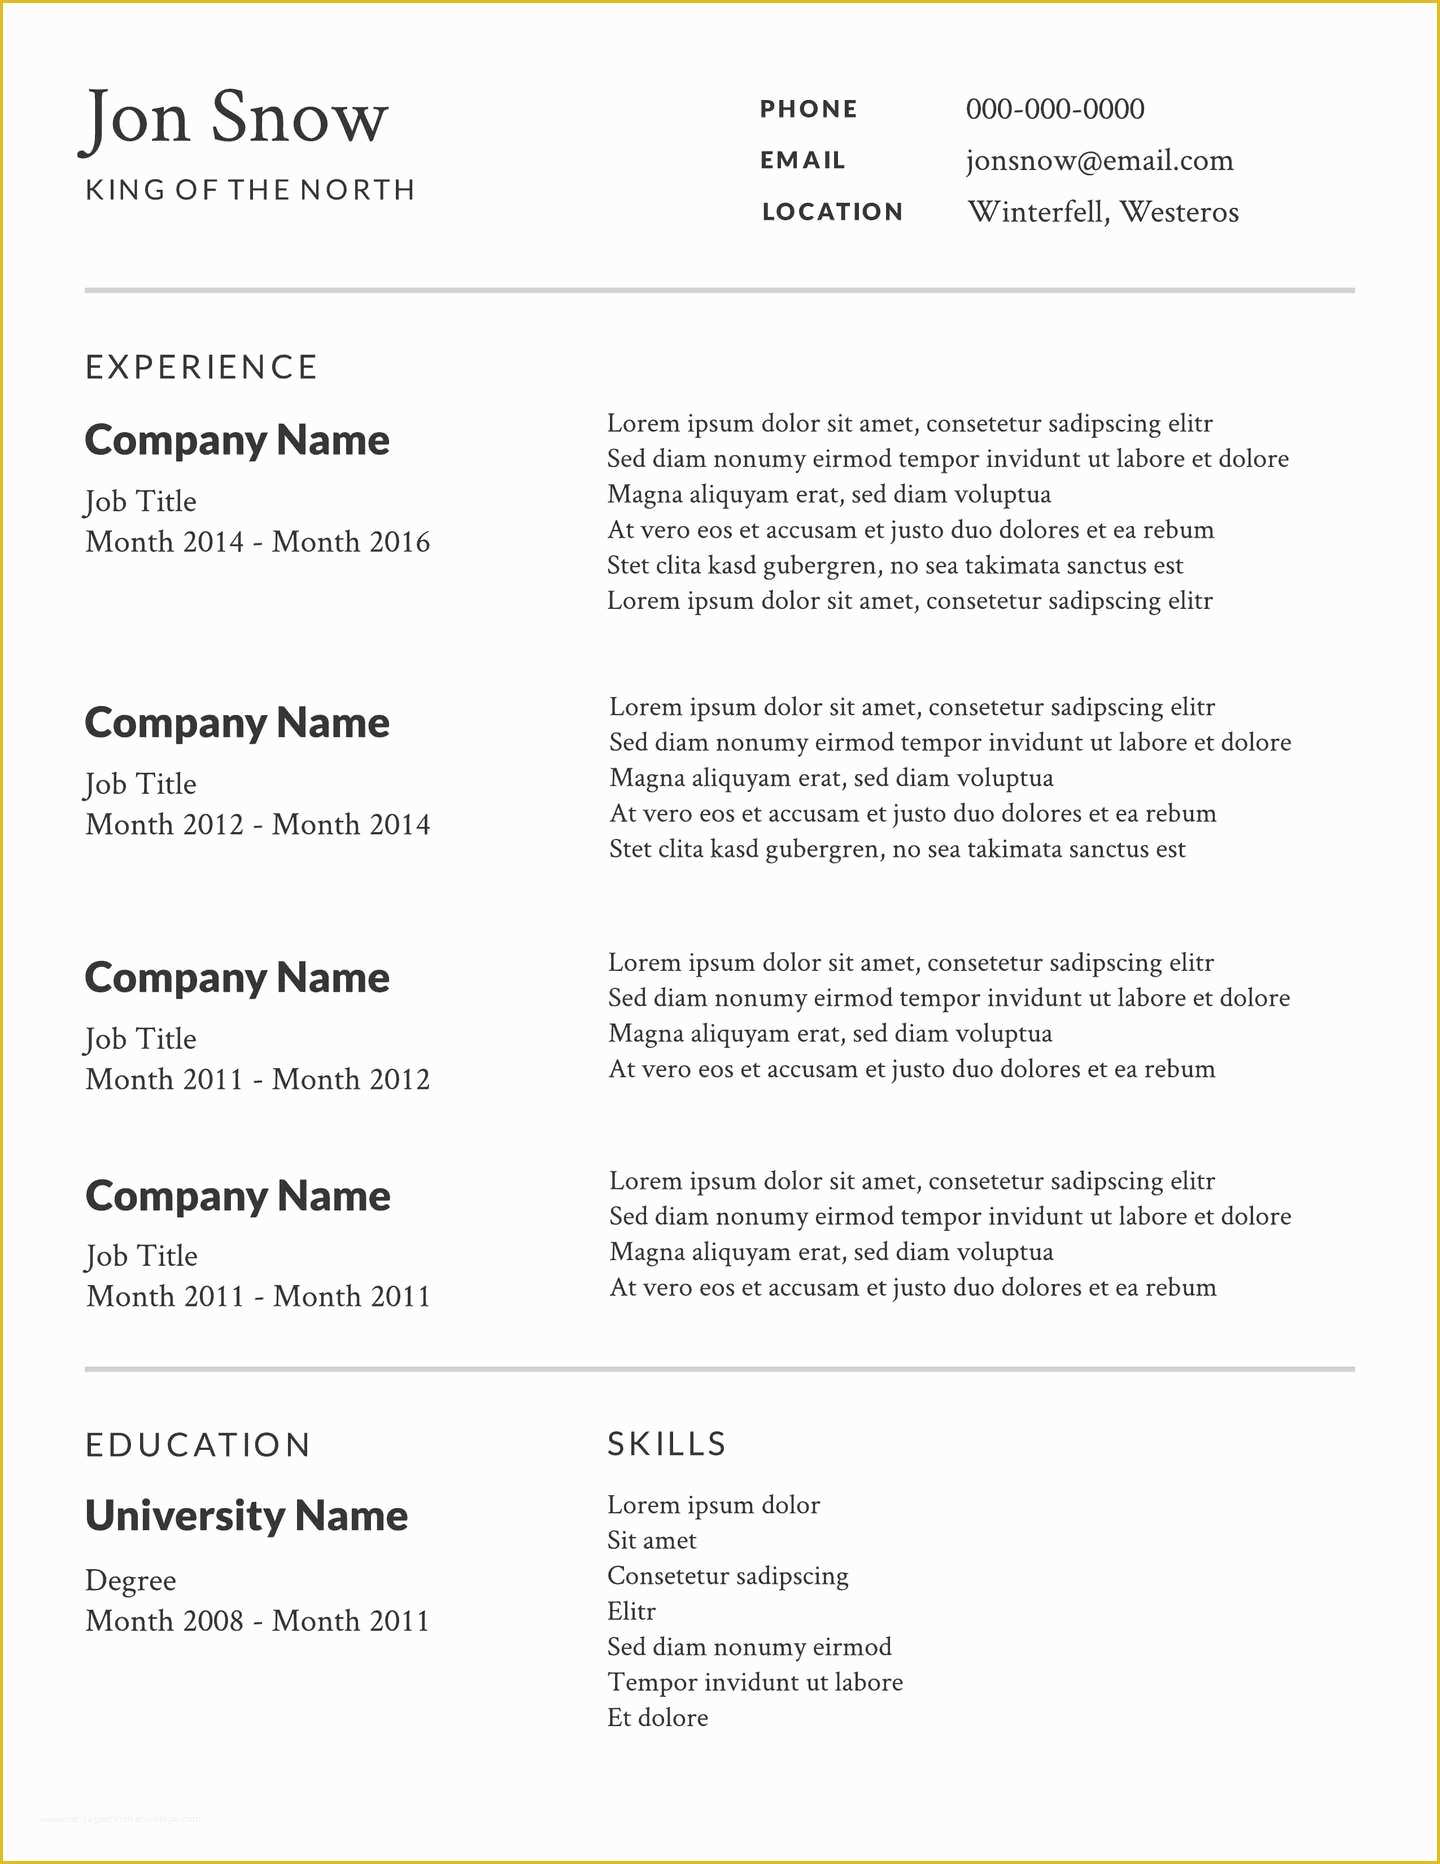 Free Sample Professional Resume Template Of 2 Free Resume Templates & Examples Lucidpress